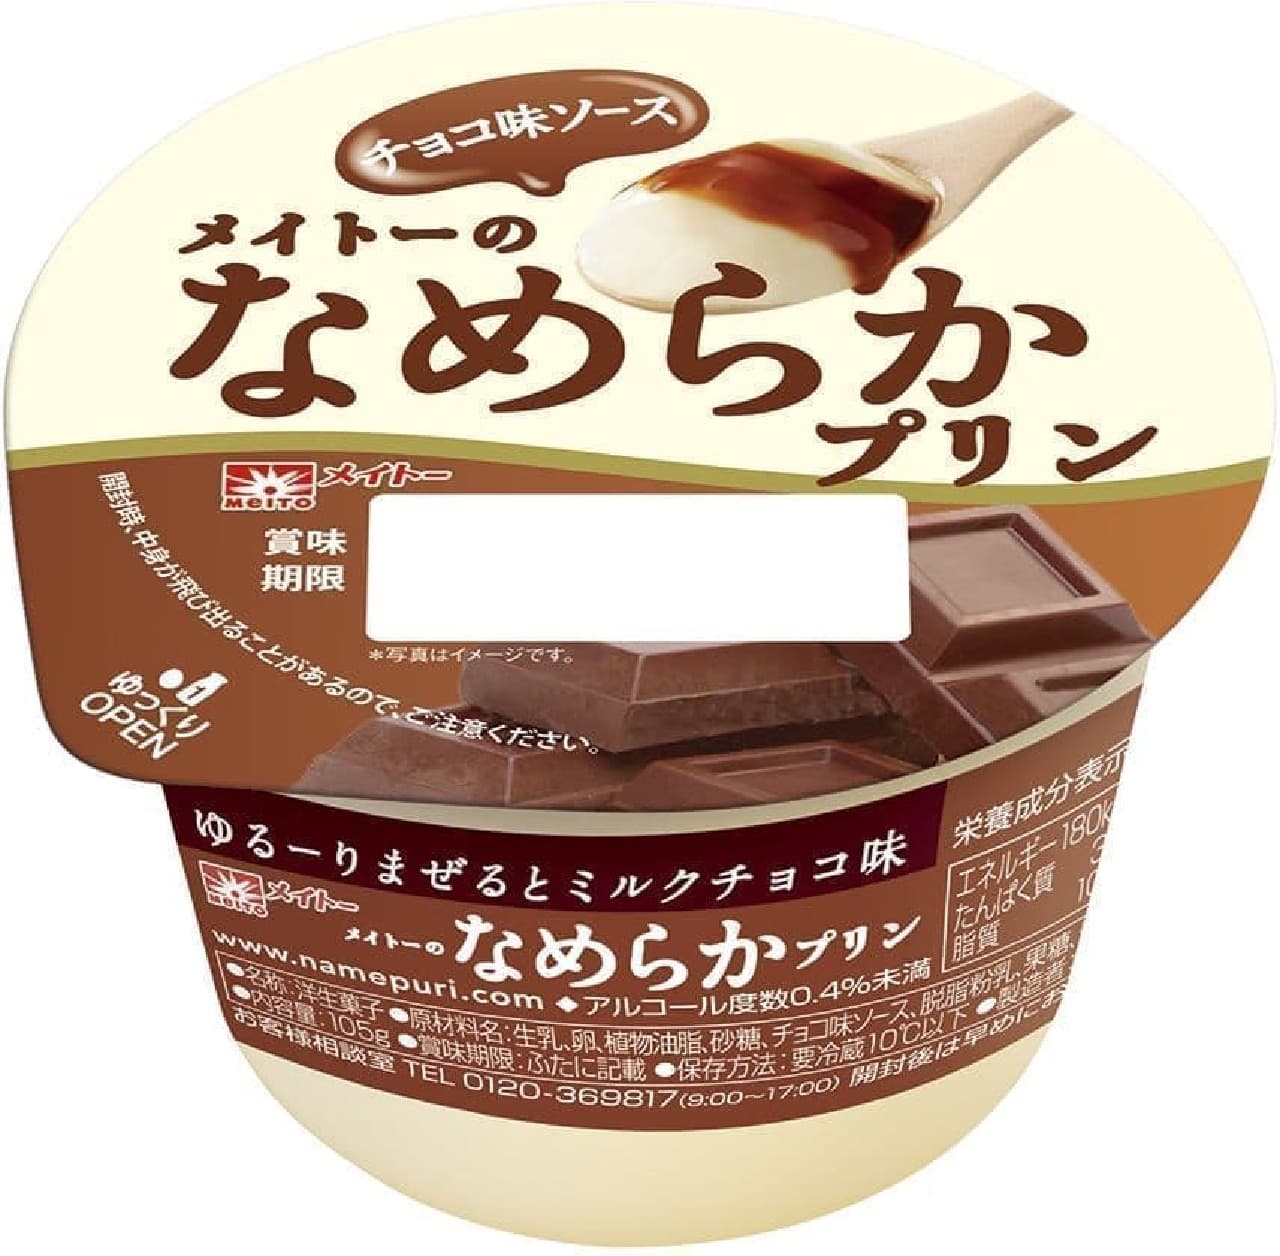 Meito's smooth pudding chocolate flavor sauce